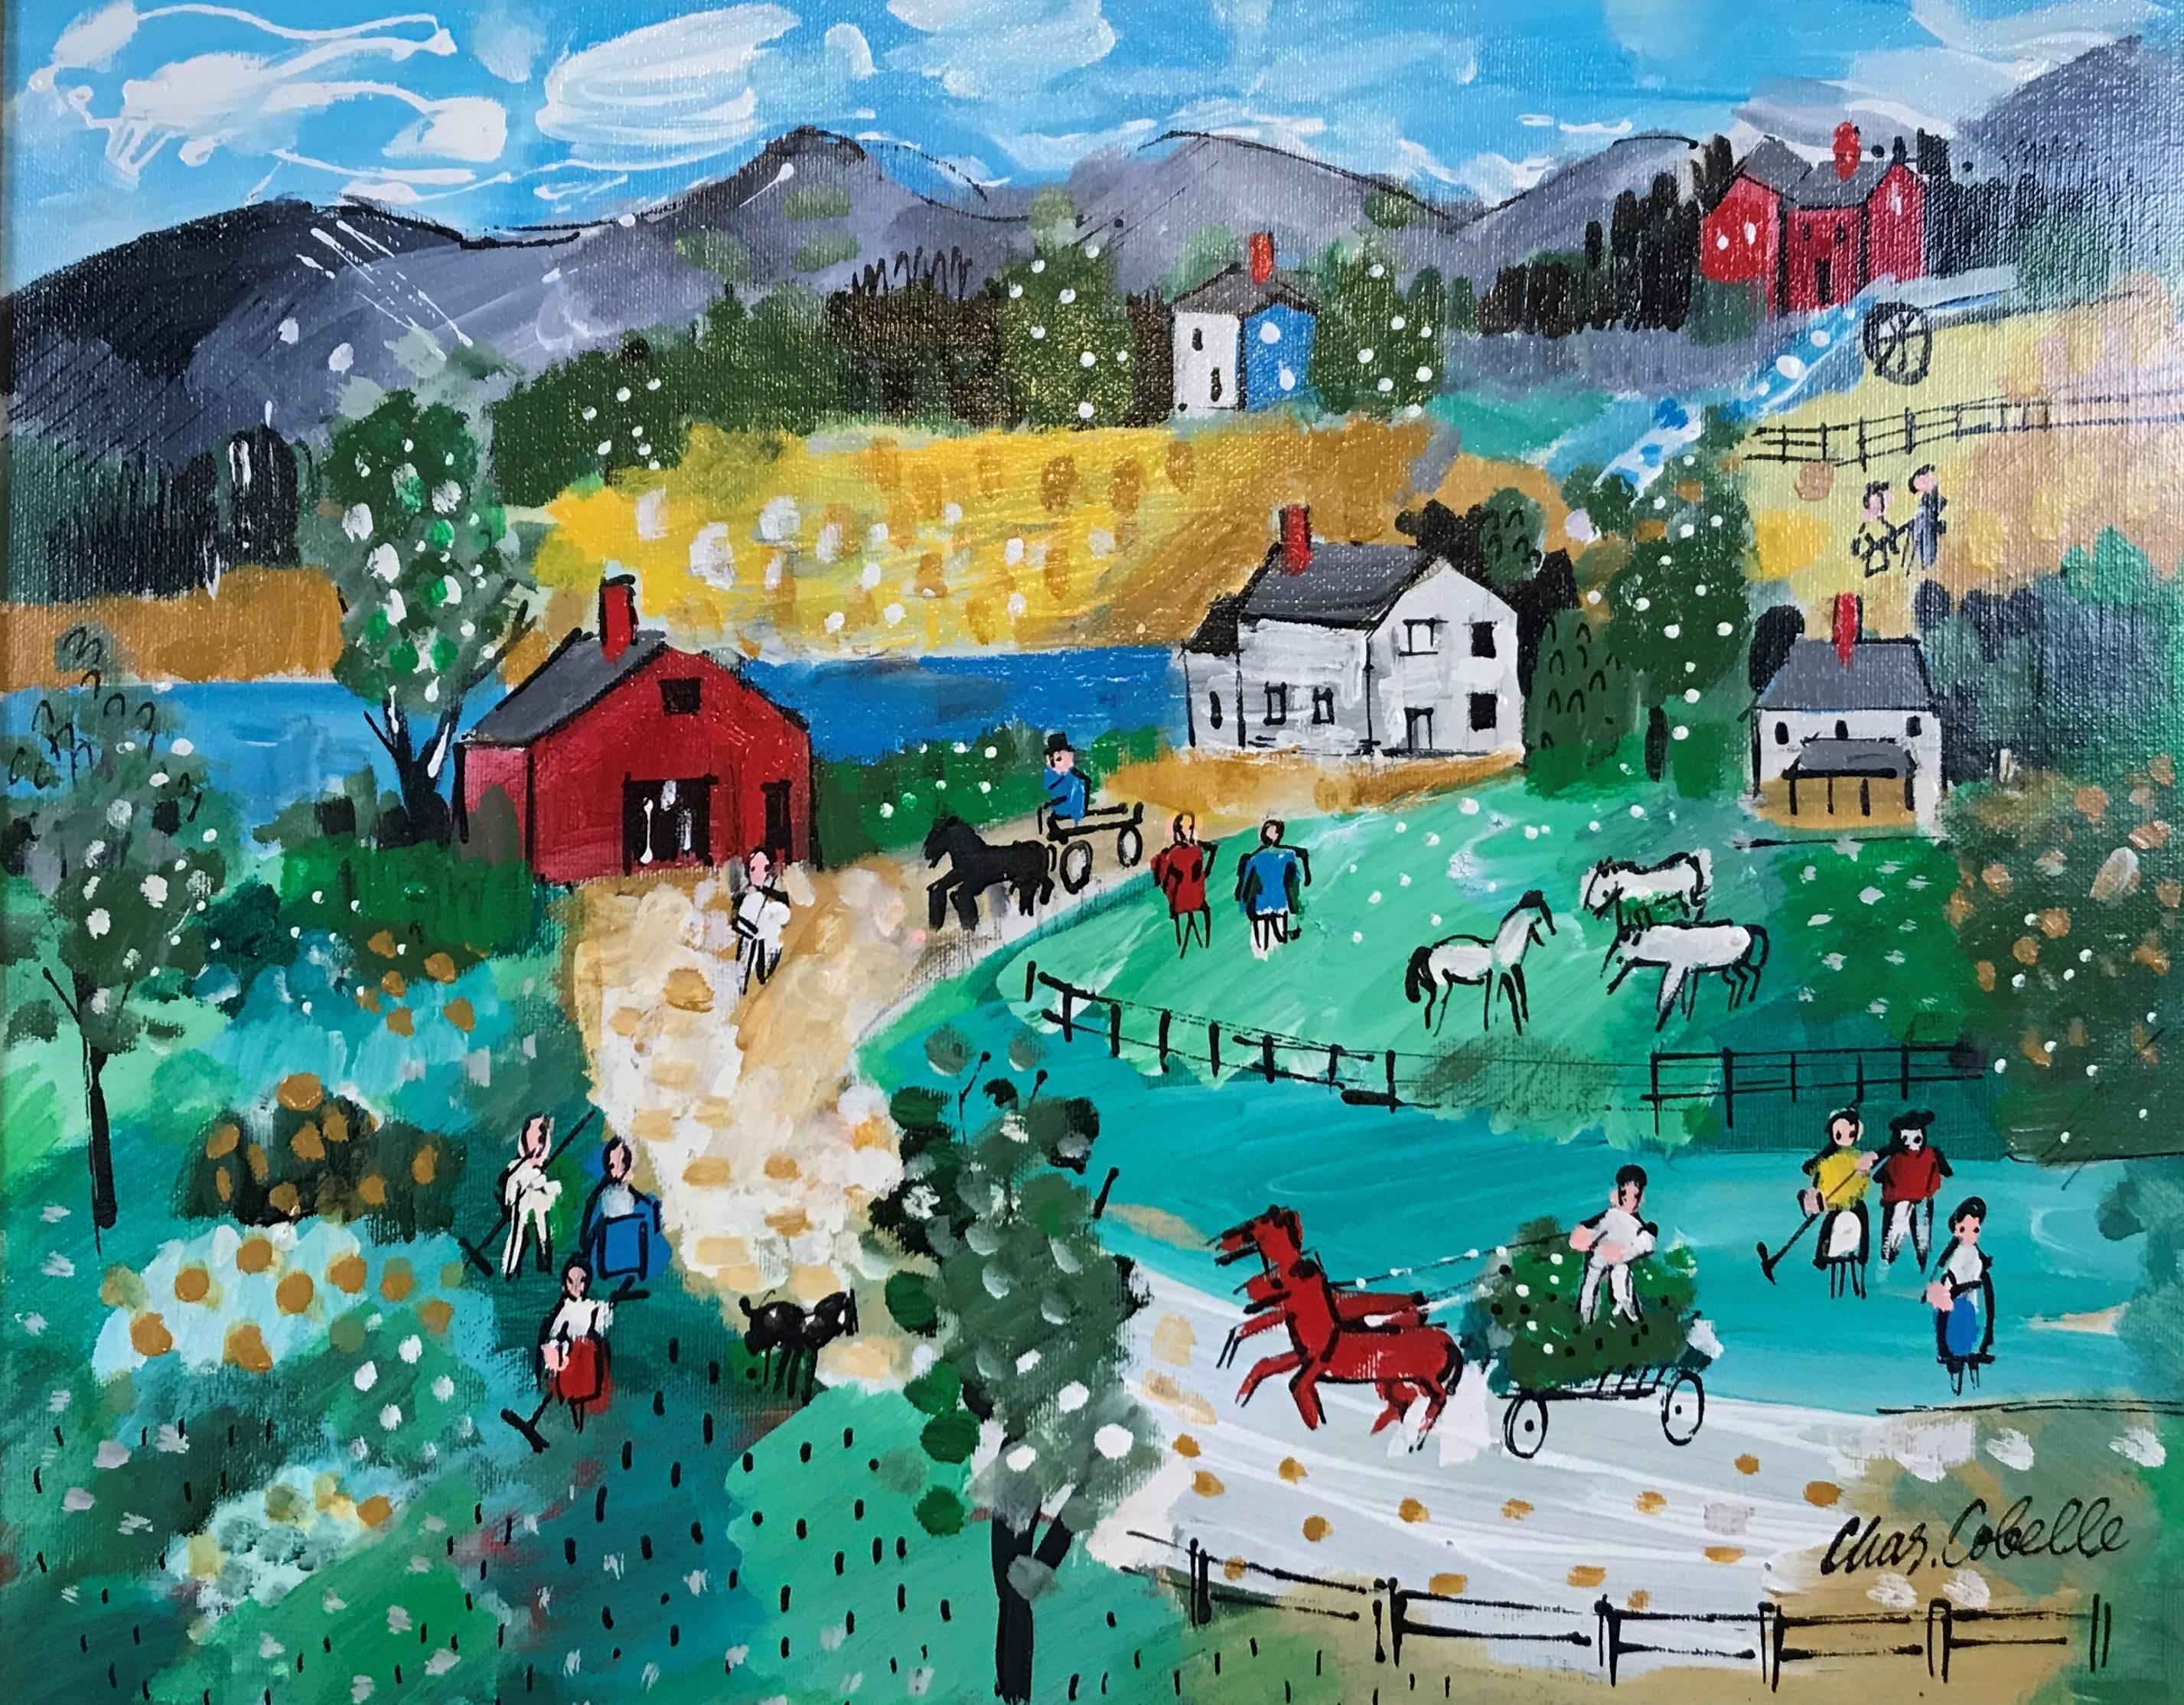 New England Farm - Painting by Charles Cobelle